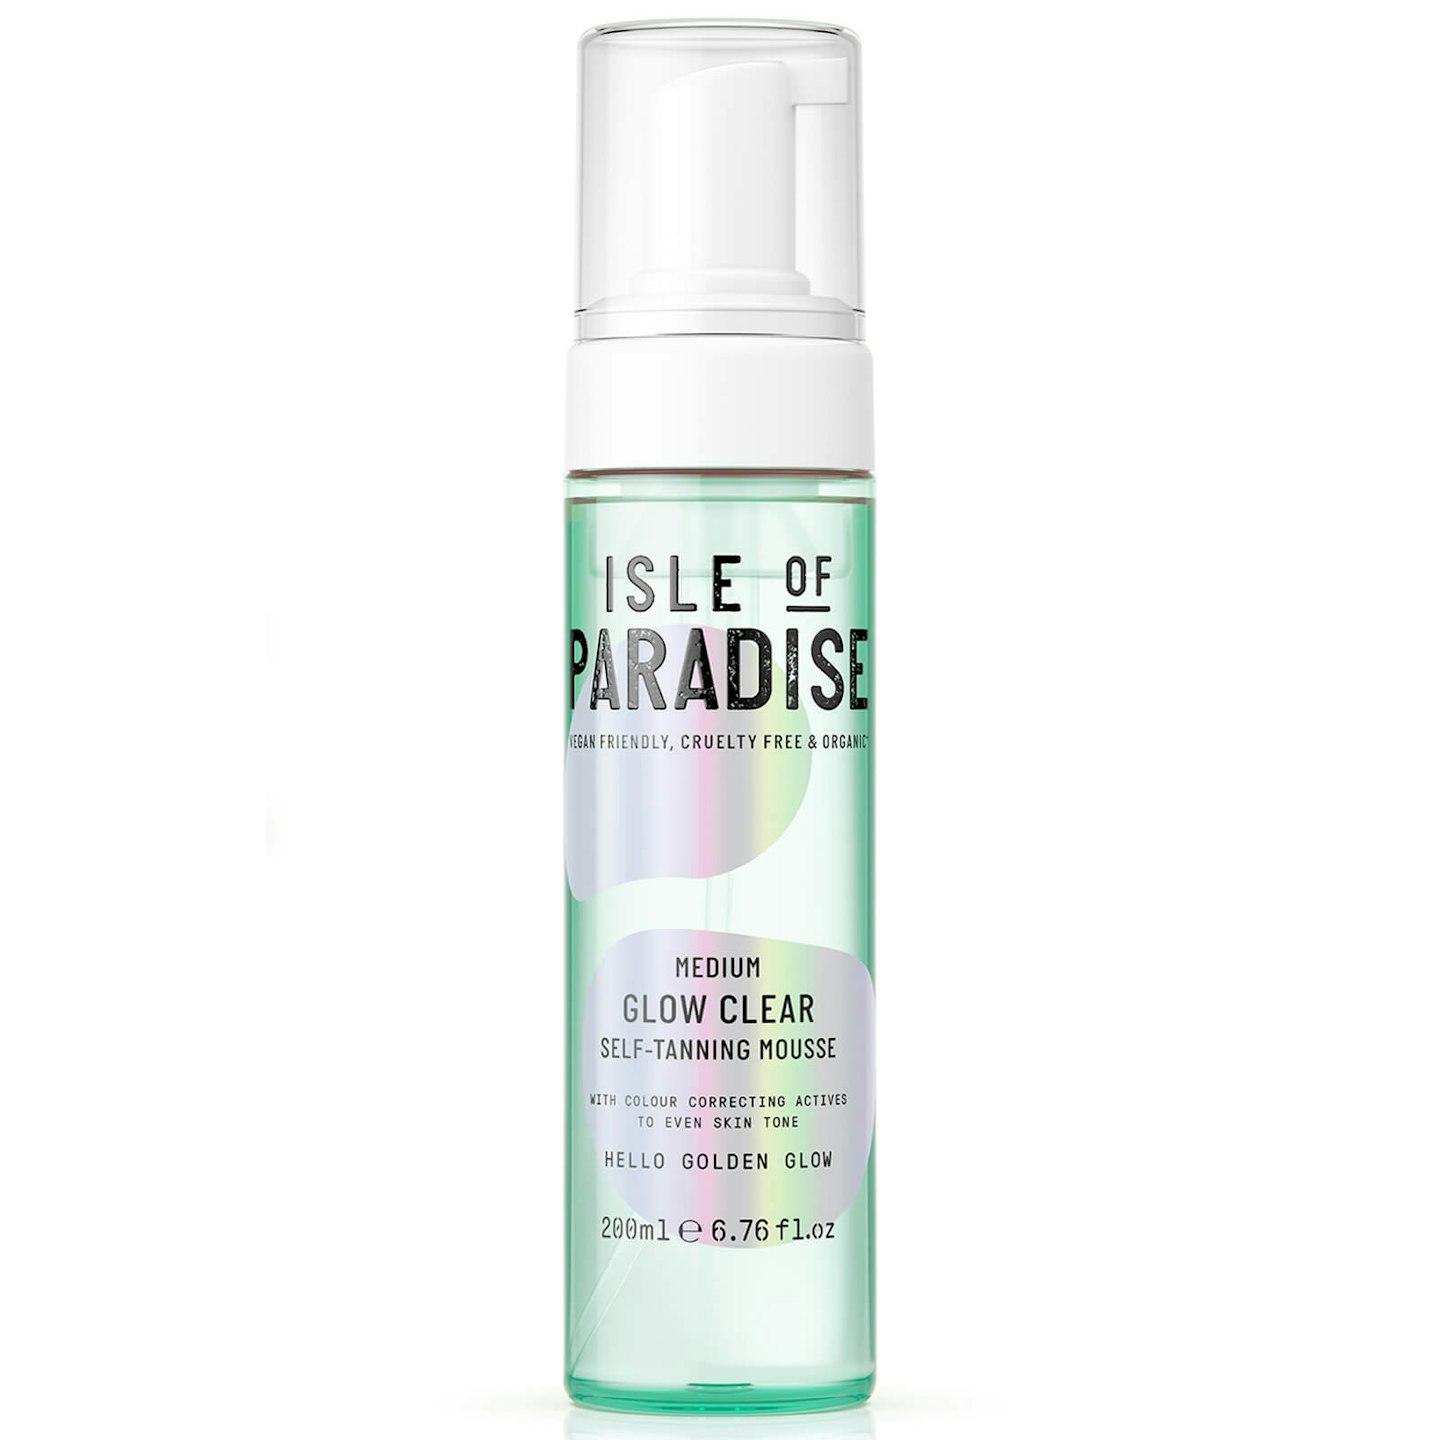 Isle of Paradise Glow Clear Self-Tanning Mousse, £19.95